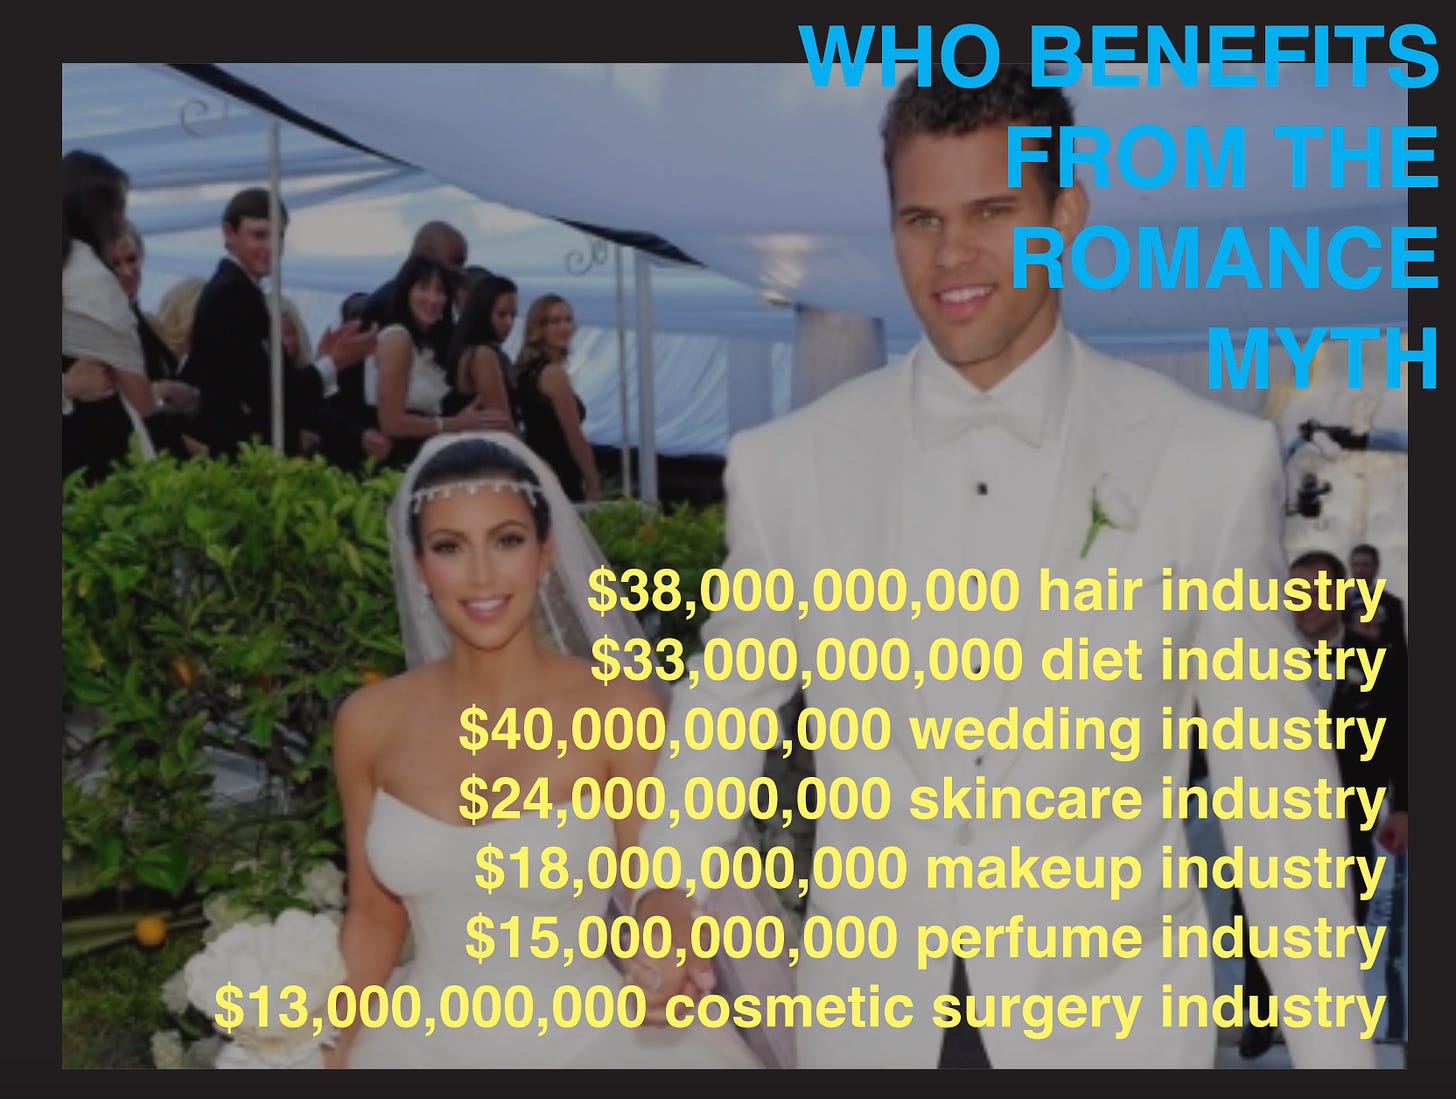 this is an image from a slide deck. in the background there is a kardashian? i think? on her wedding day walking hand in hand with some tall white dude. text over it says WHO BENEFITS FROM THE ROMANCE MYTH / $38,000,000,000 hair industry, $33,000,000,000 diet industry, $40,000,000,000 wedding industry, $24,000,000,000 skincare industry, $18,000,000,000 makeup industry, $15,000,000,000 perfume industry, $13,000,000,000 cosmetic surgery industry